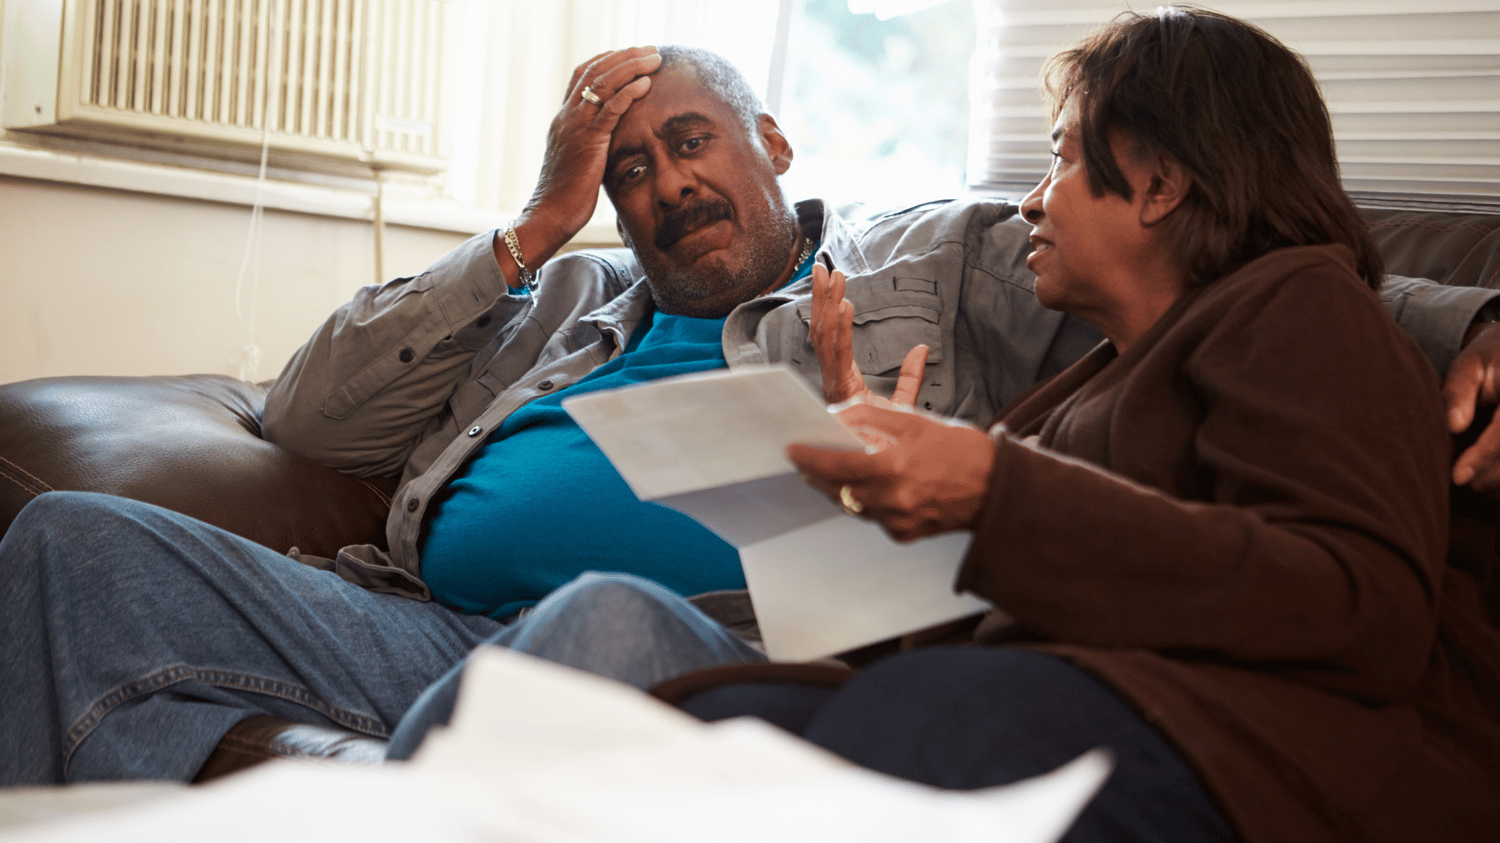 LONG-TERM CARE INSURANCE: A MUST FOR THOSE 50+